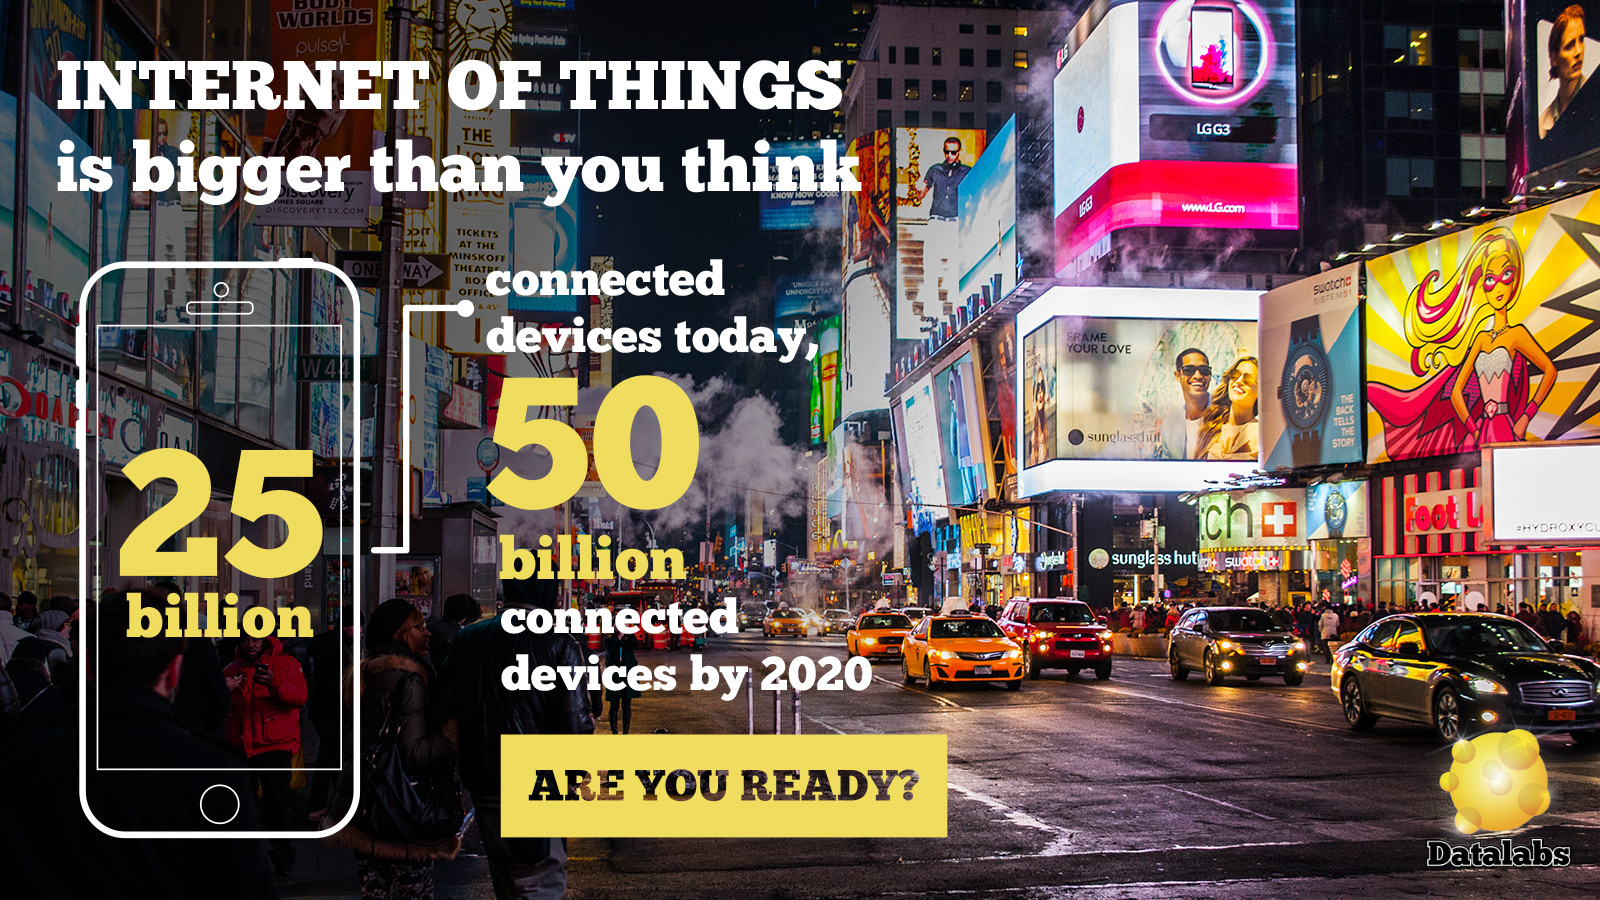 The Internet of Things Growth